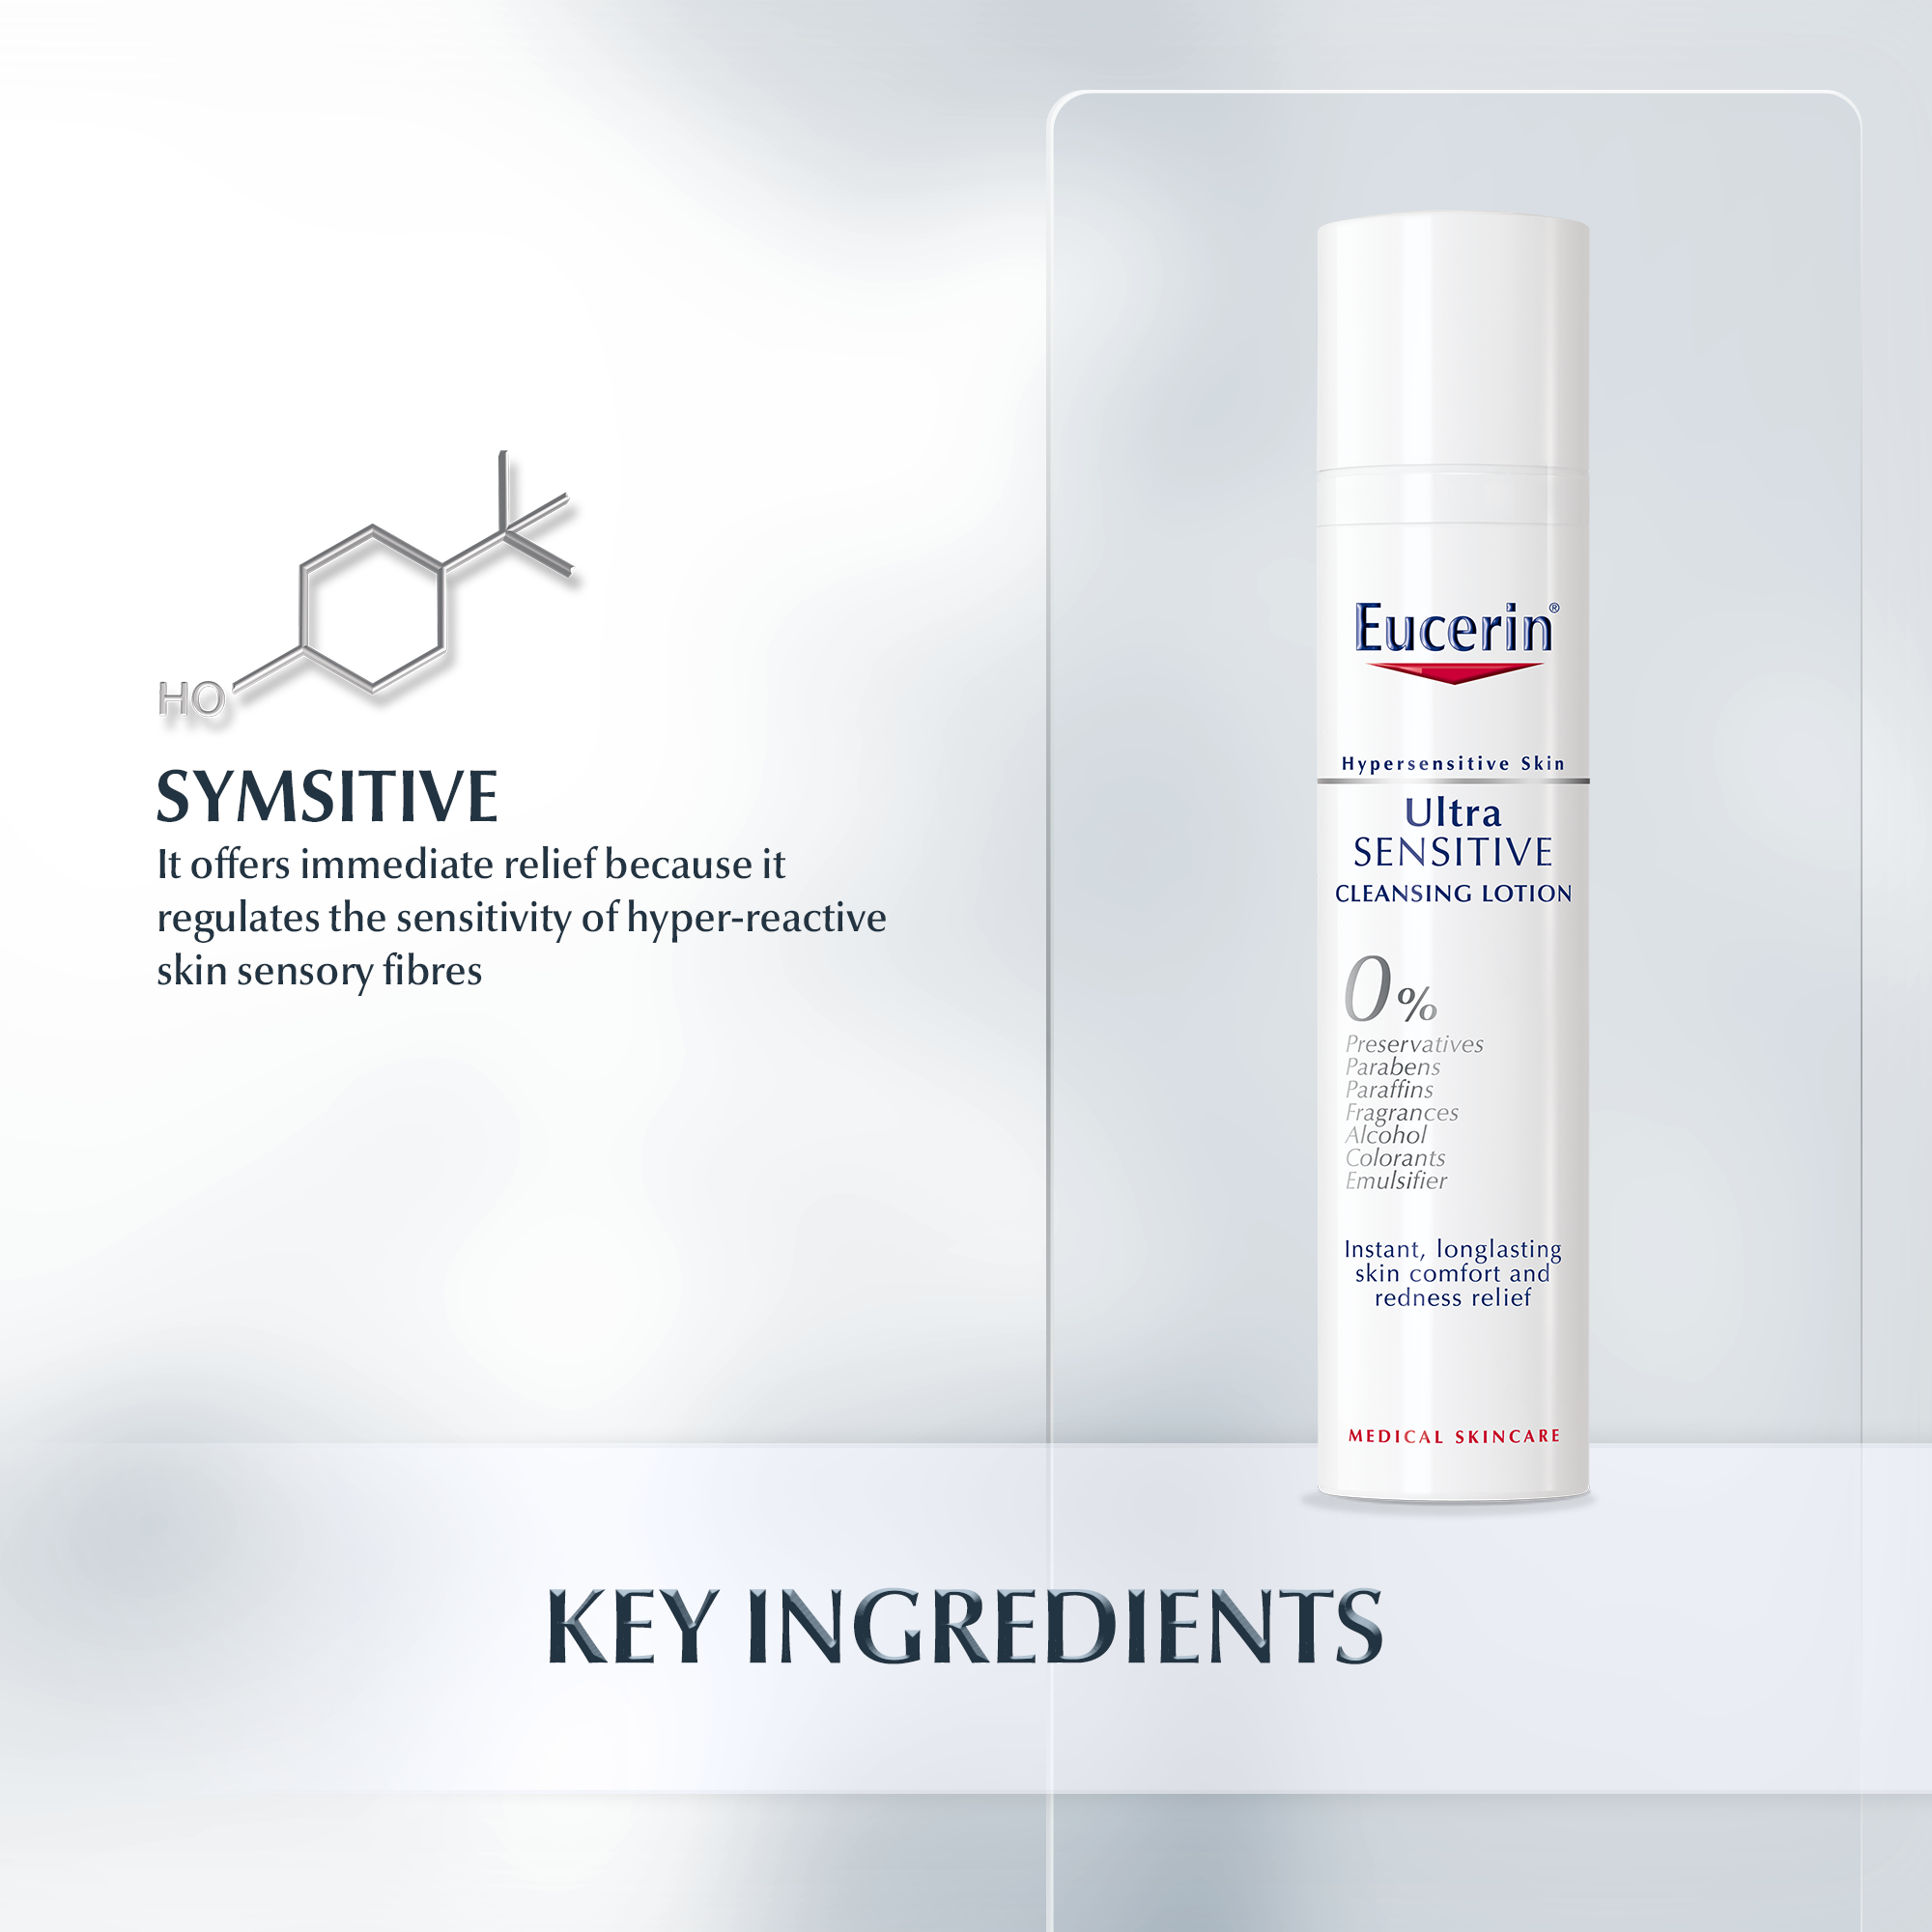 Eucerin UltraSENSITIVE Lotion thoroughly and gently hypersensitive and effectively make-up.